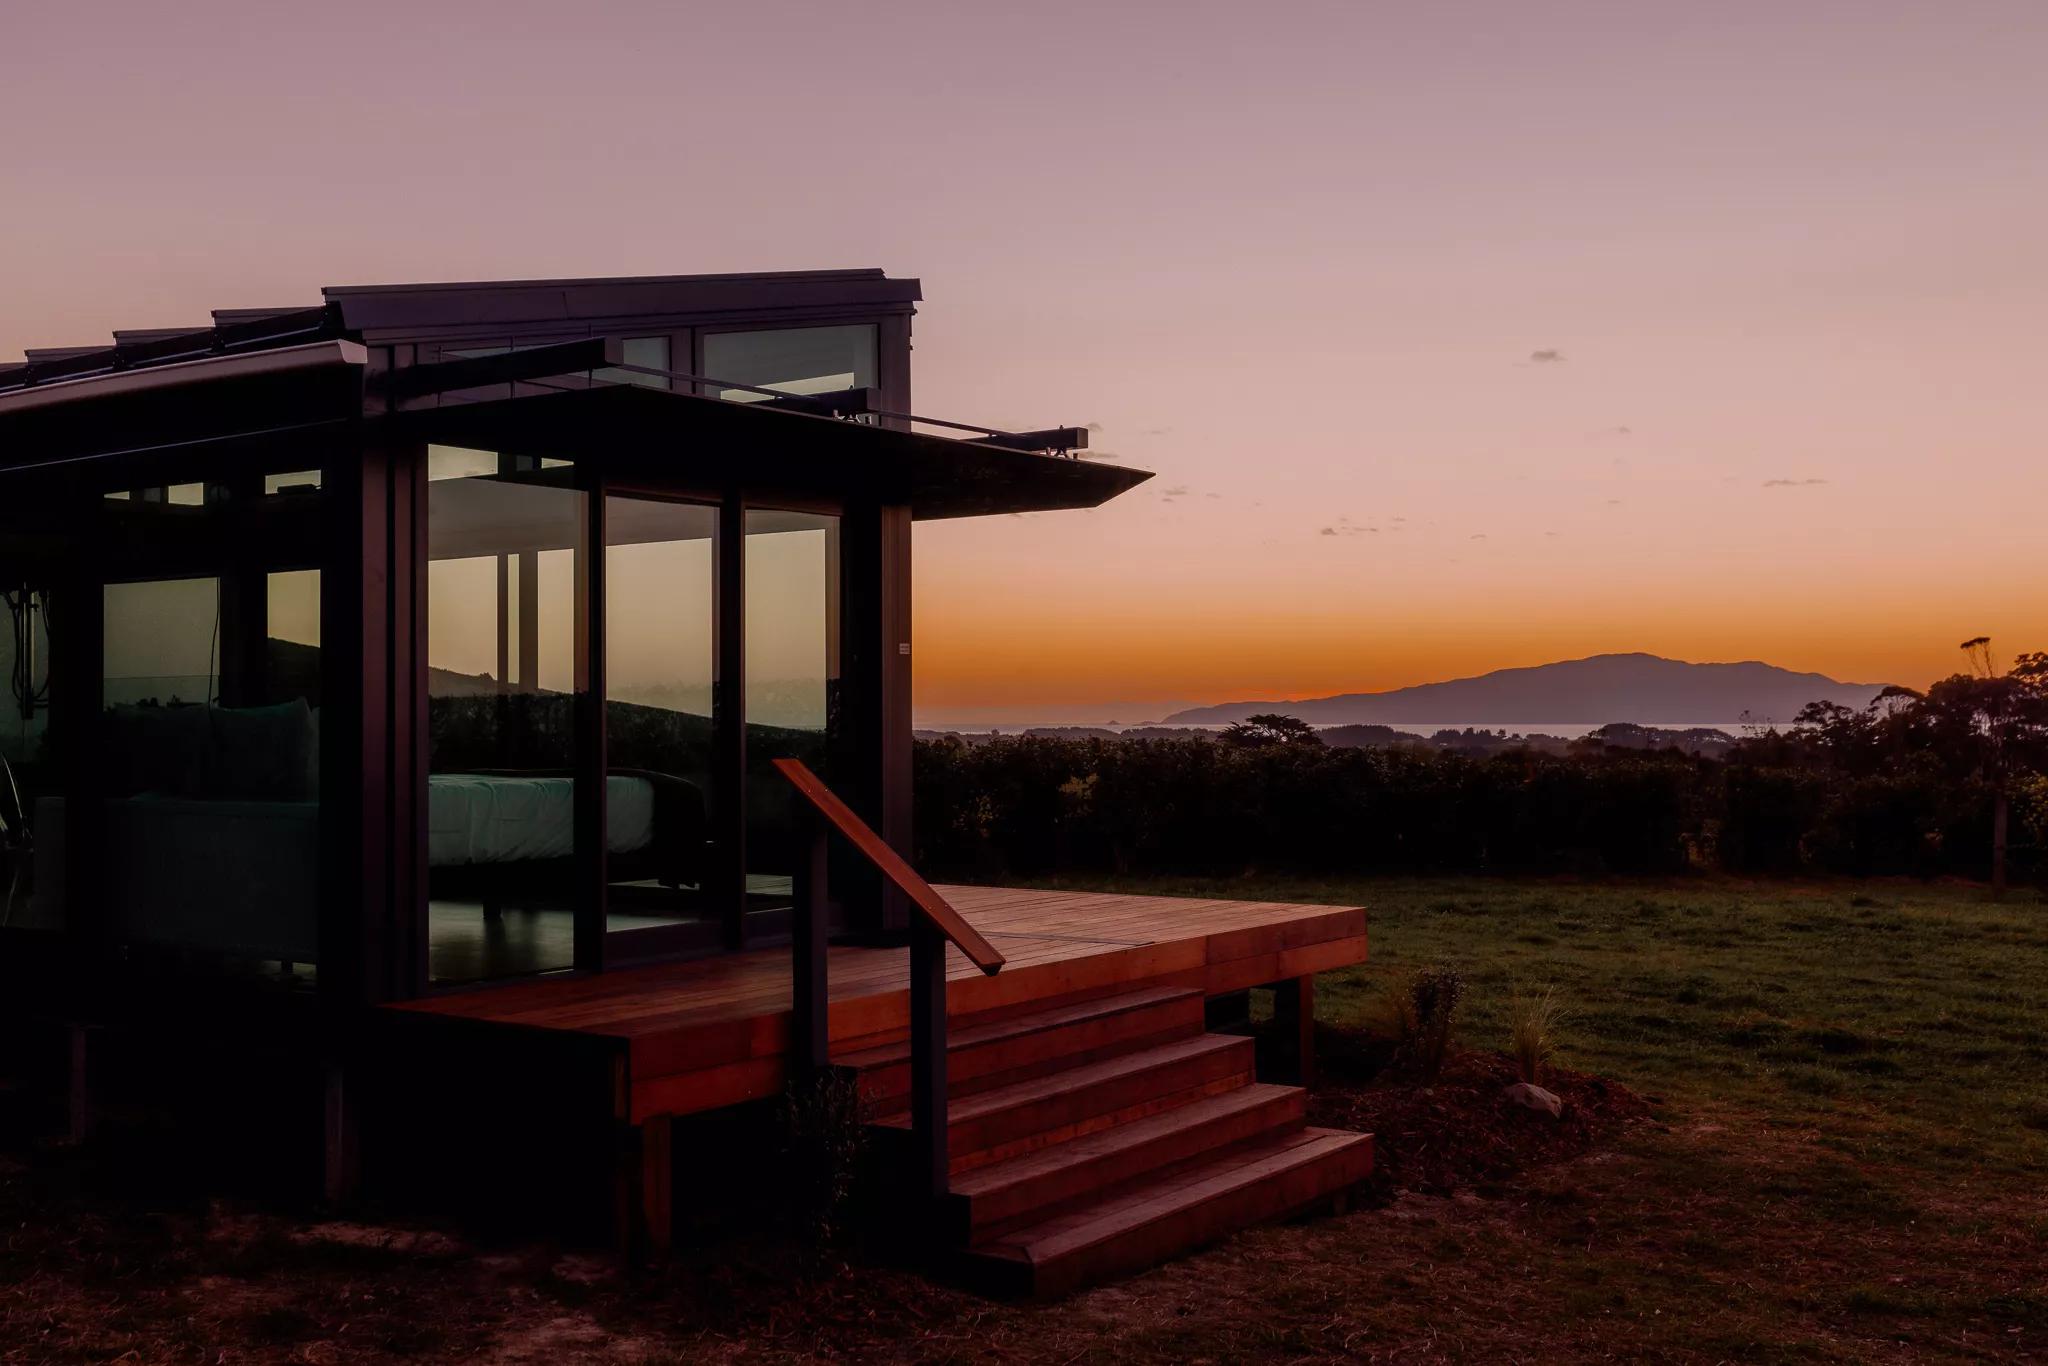 Kokomea PurePod is a luxurious glass eco-cabin that sits on a grapevine nursery high above the Kāpiti Coast. The sky is a gradient of hazy pink to bright orange on the horizon with Kapiti island seen in the background. 